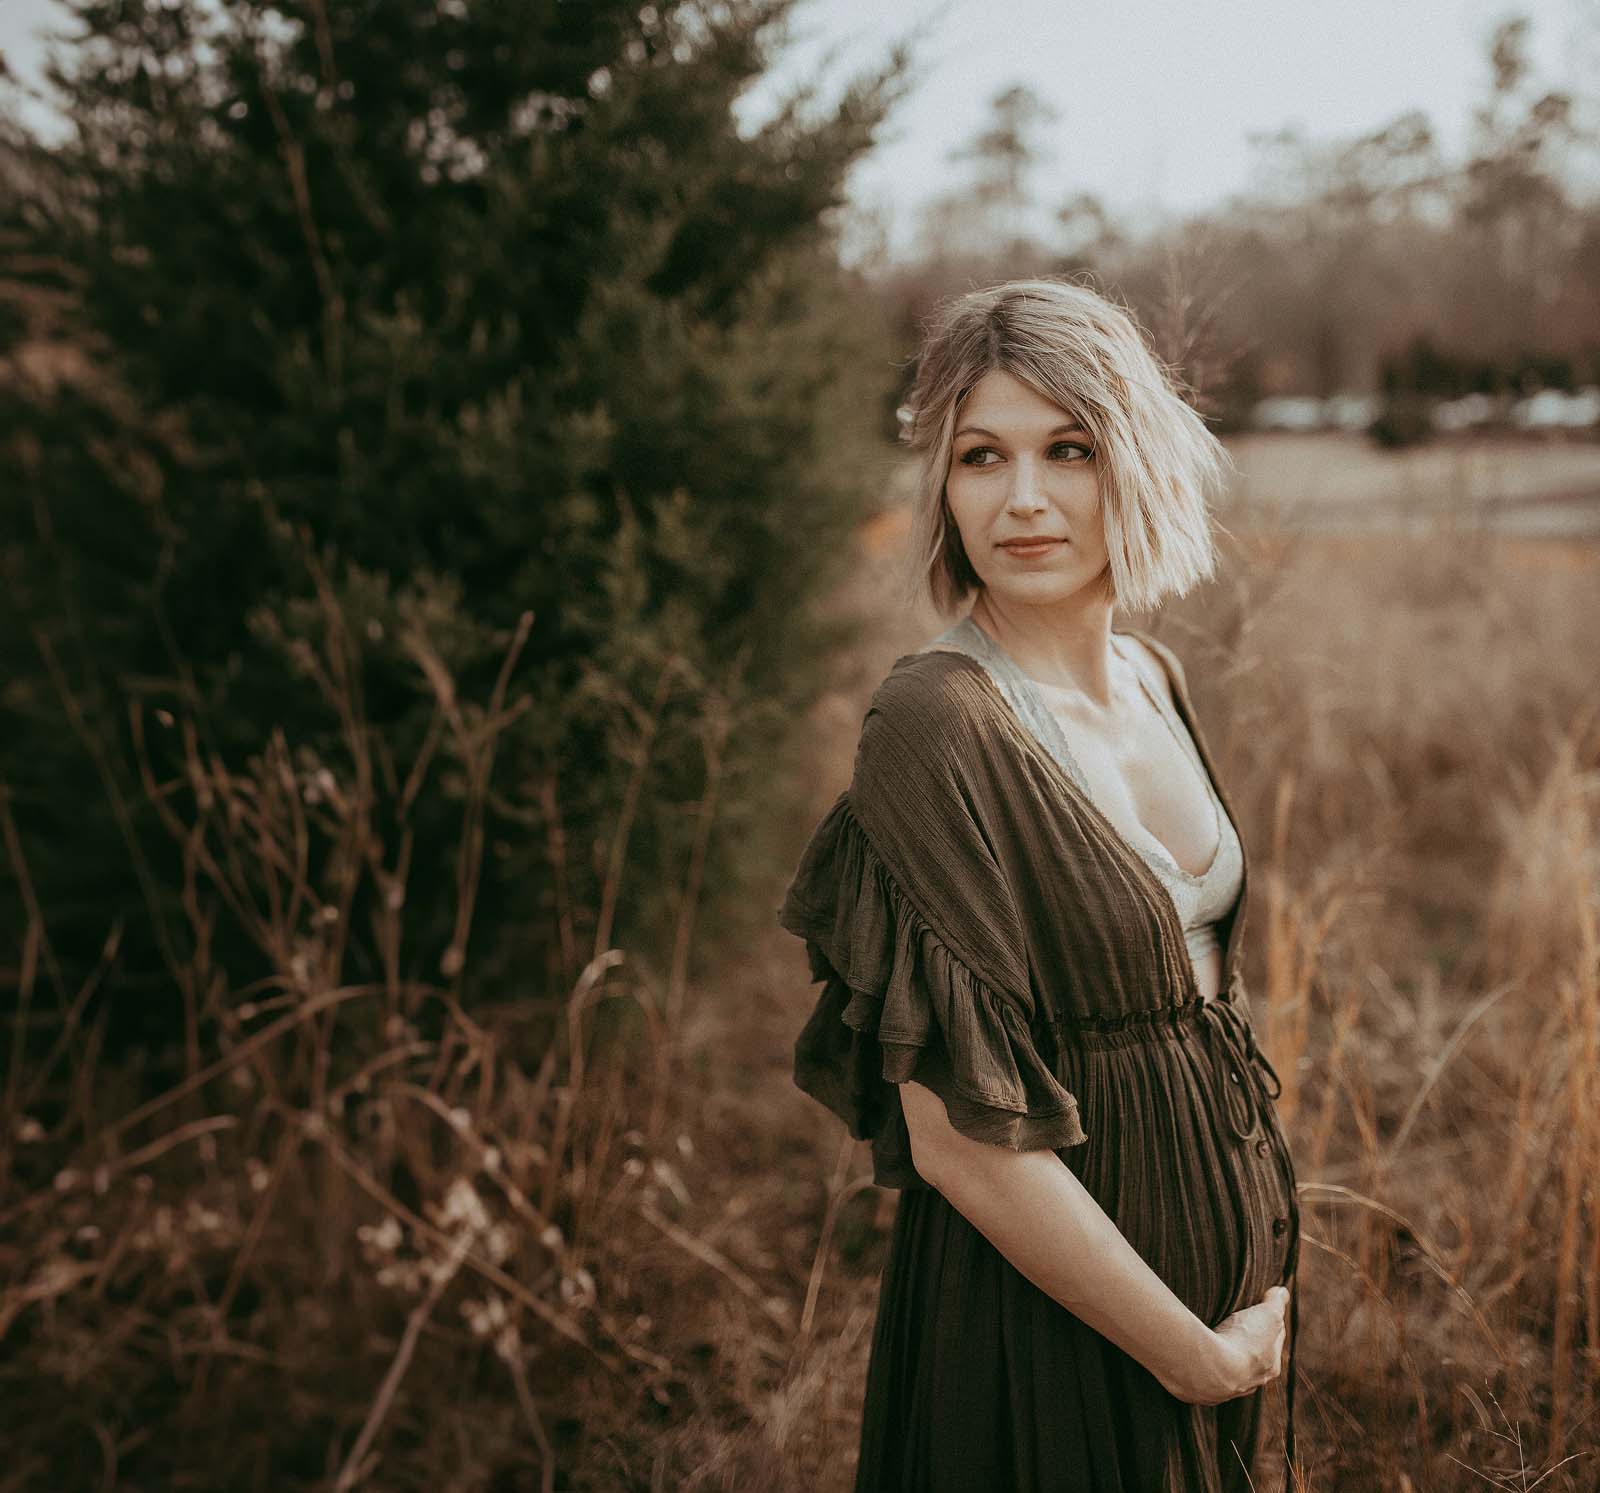 A pregnant woman with short blonde hair stands gracefully in a boho maxi dress, surrounded by tall grass, near the Blissful Births in Raleigh. The serene setting encapsulates the anticipation and beauty of the maternity journey.